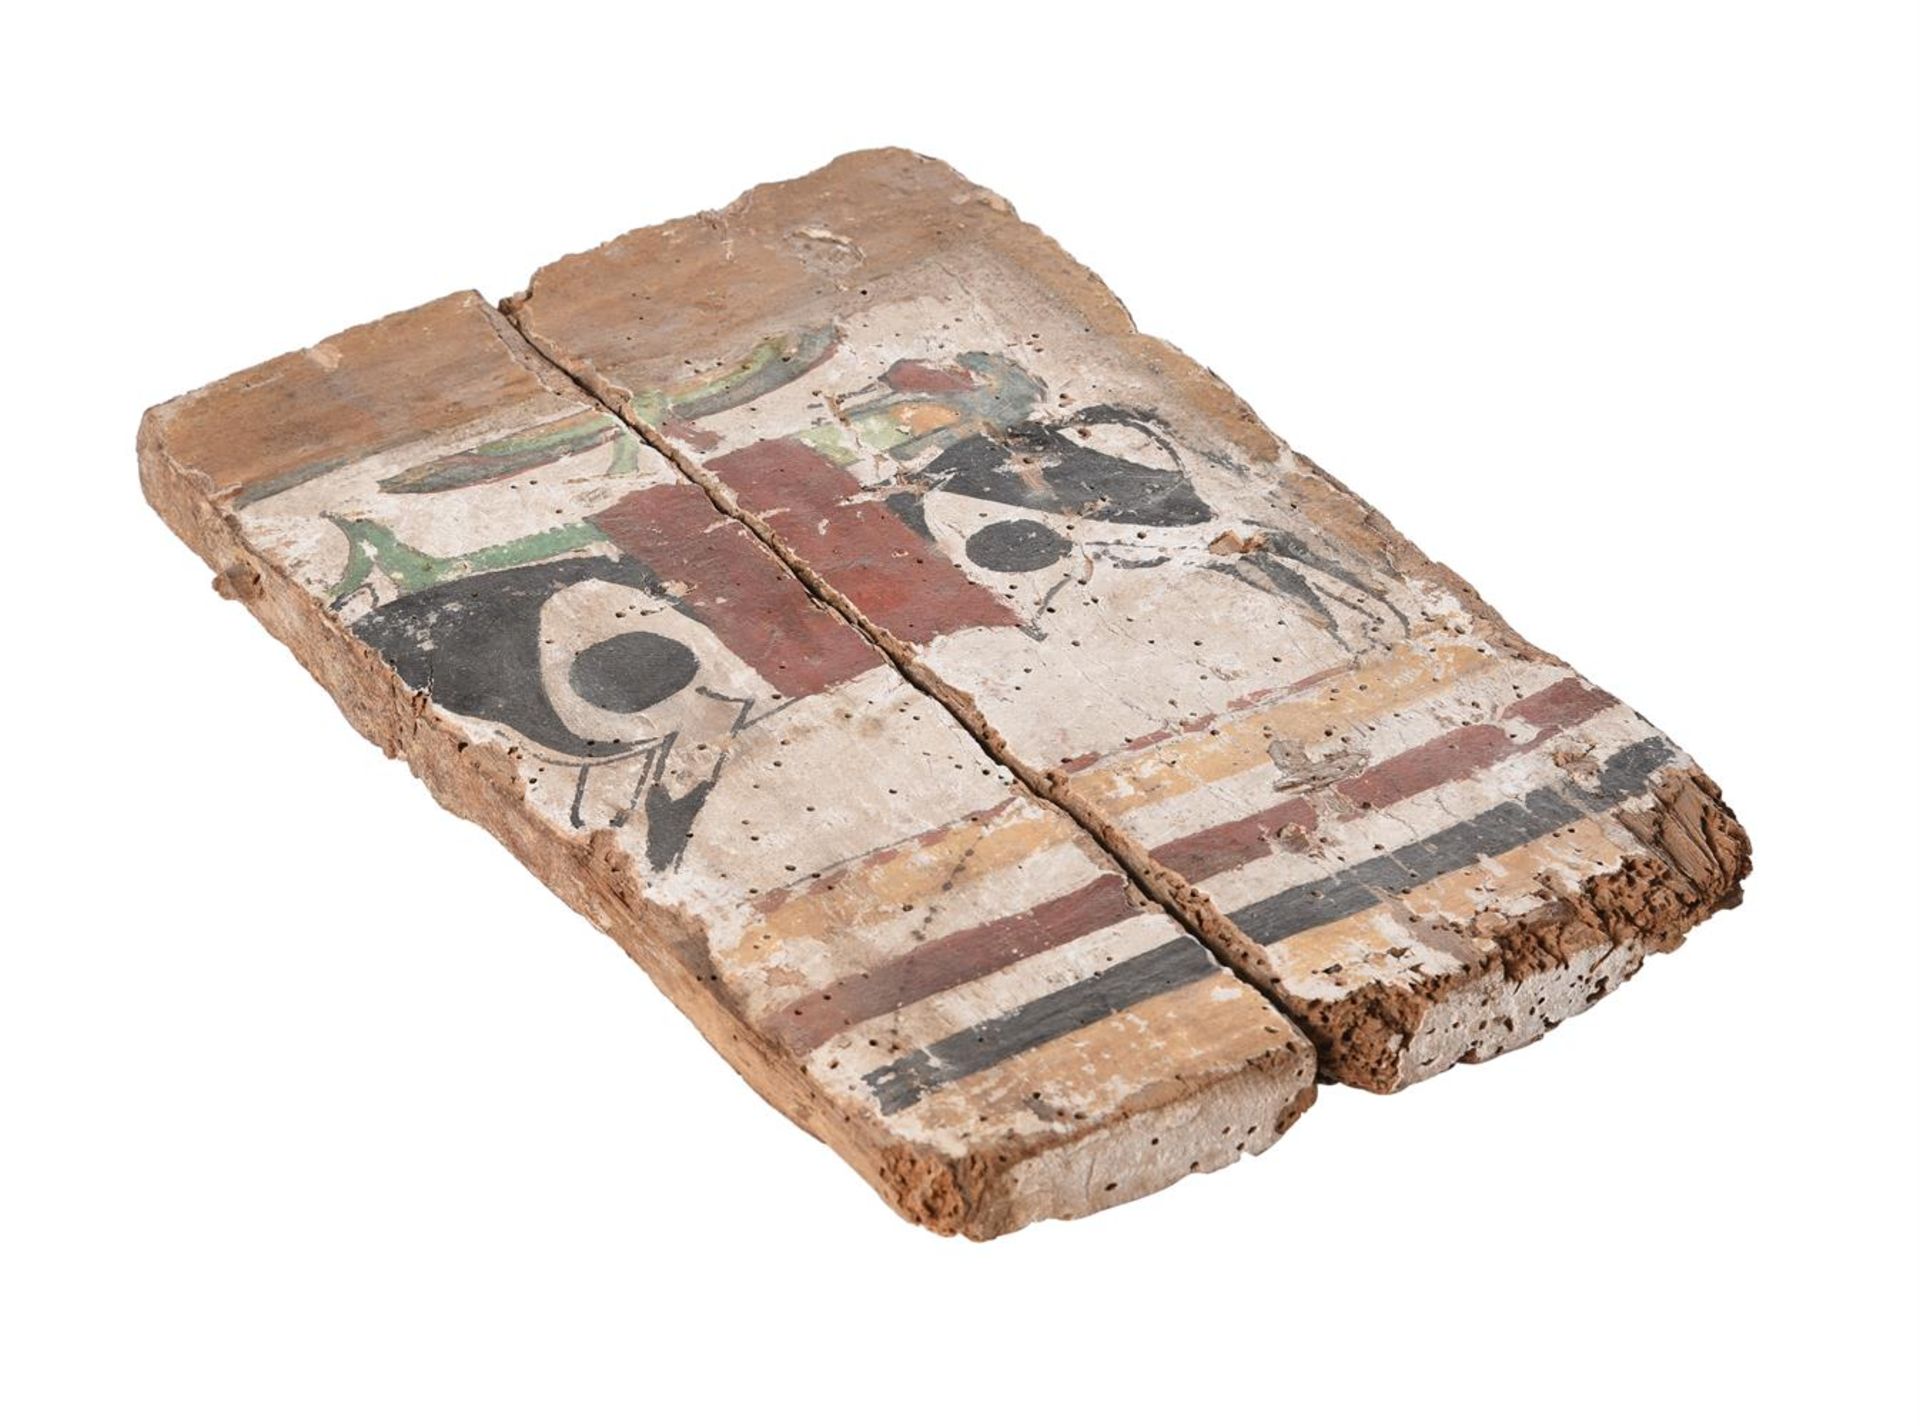 AN EGYPTIAN POLYCHROME PAINTED COFFIN FOOT PANEL, LATE PERIOD, AFTER 664 B.C. - Bild 2 aus 3